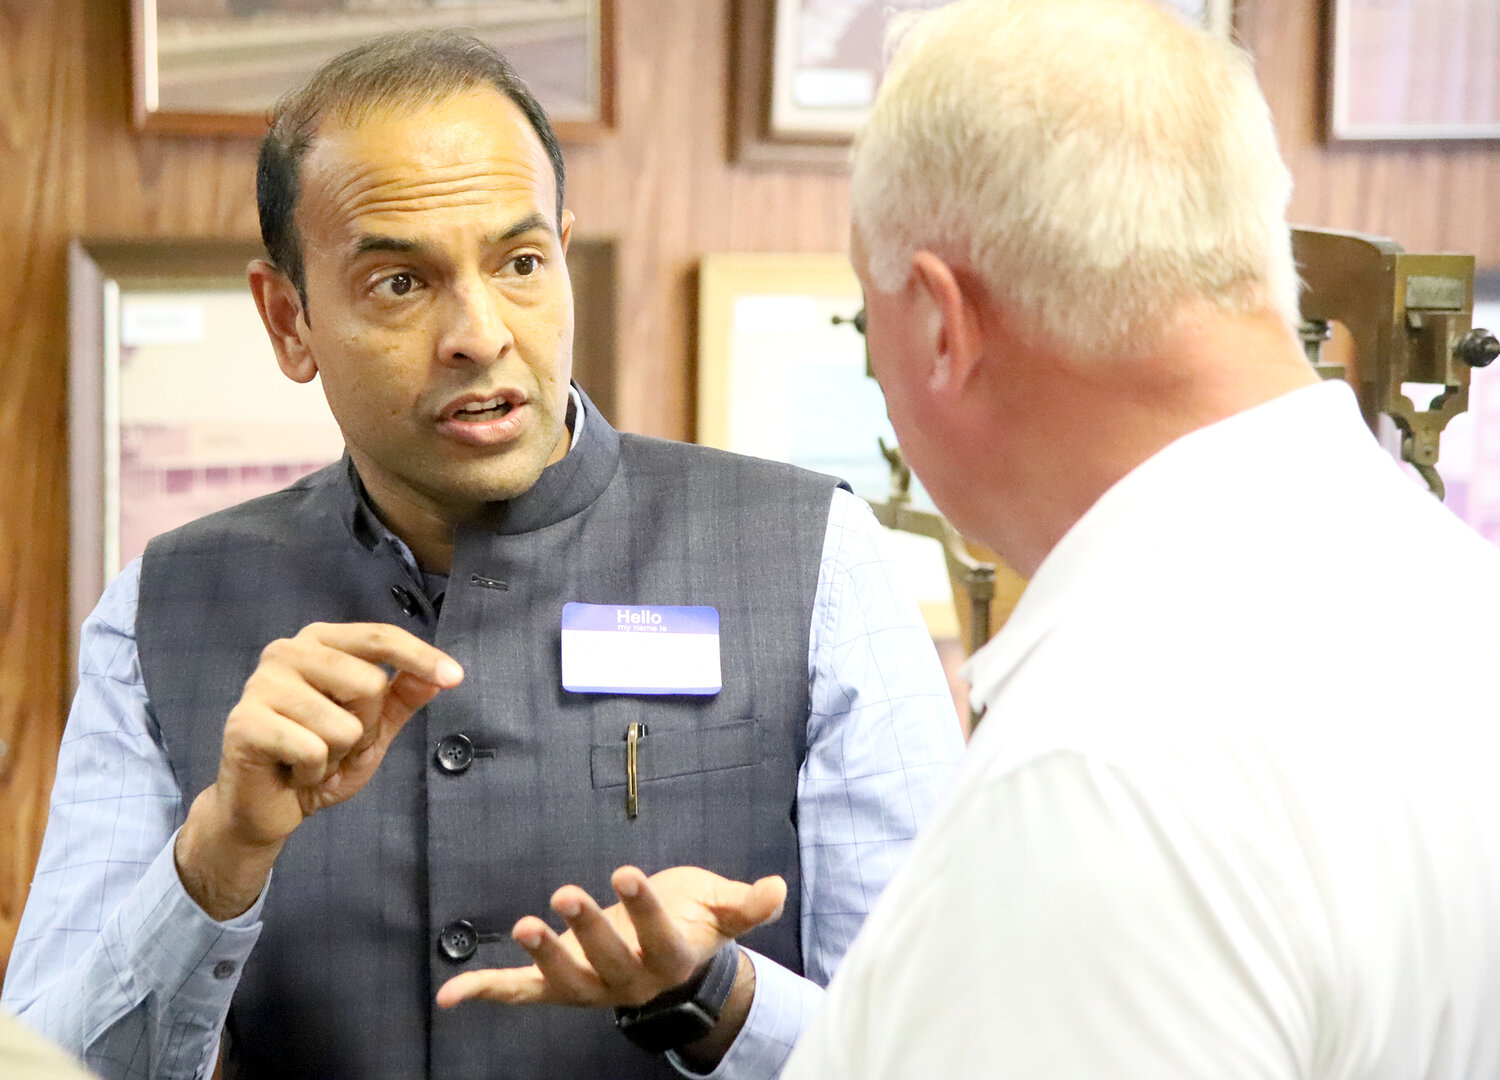 Sheaffer Pen owner Nikhil Ranjan talks with a former Sheaffer employee about his plans for the company since he purchased it in July. Ranjan and his parents were in town Thursday and Friday to learn about the city and the Sheaffer Pen legacy.